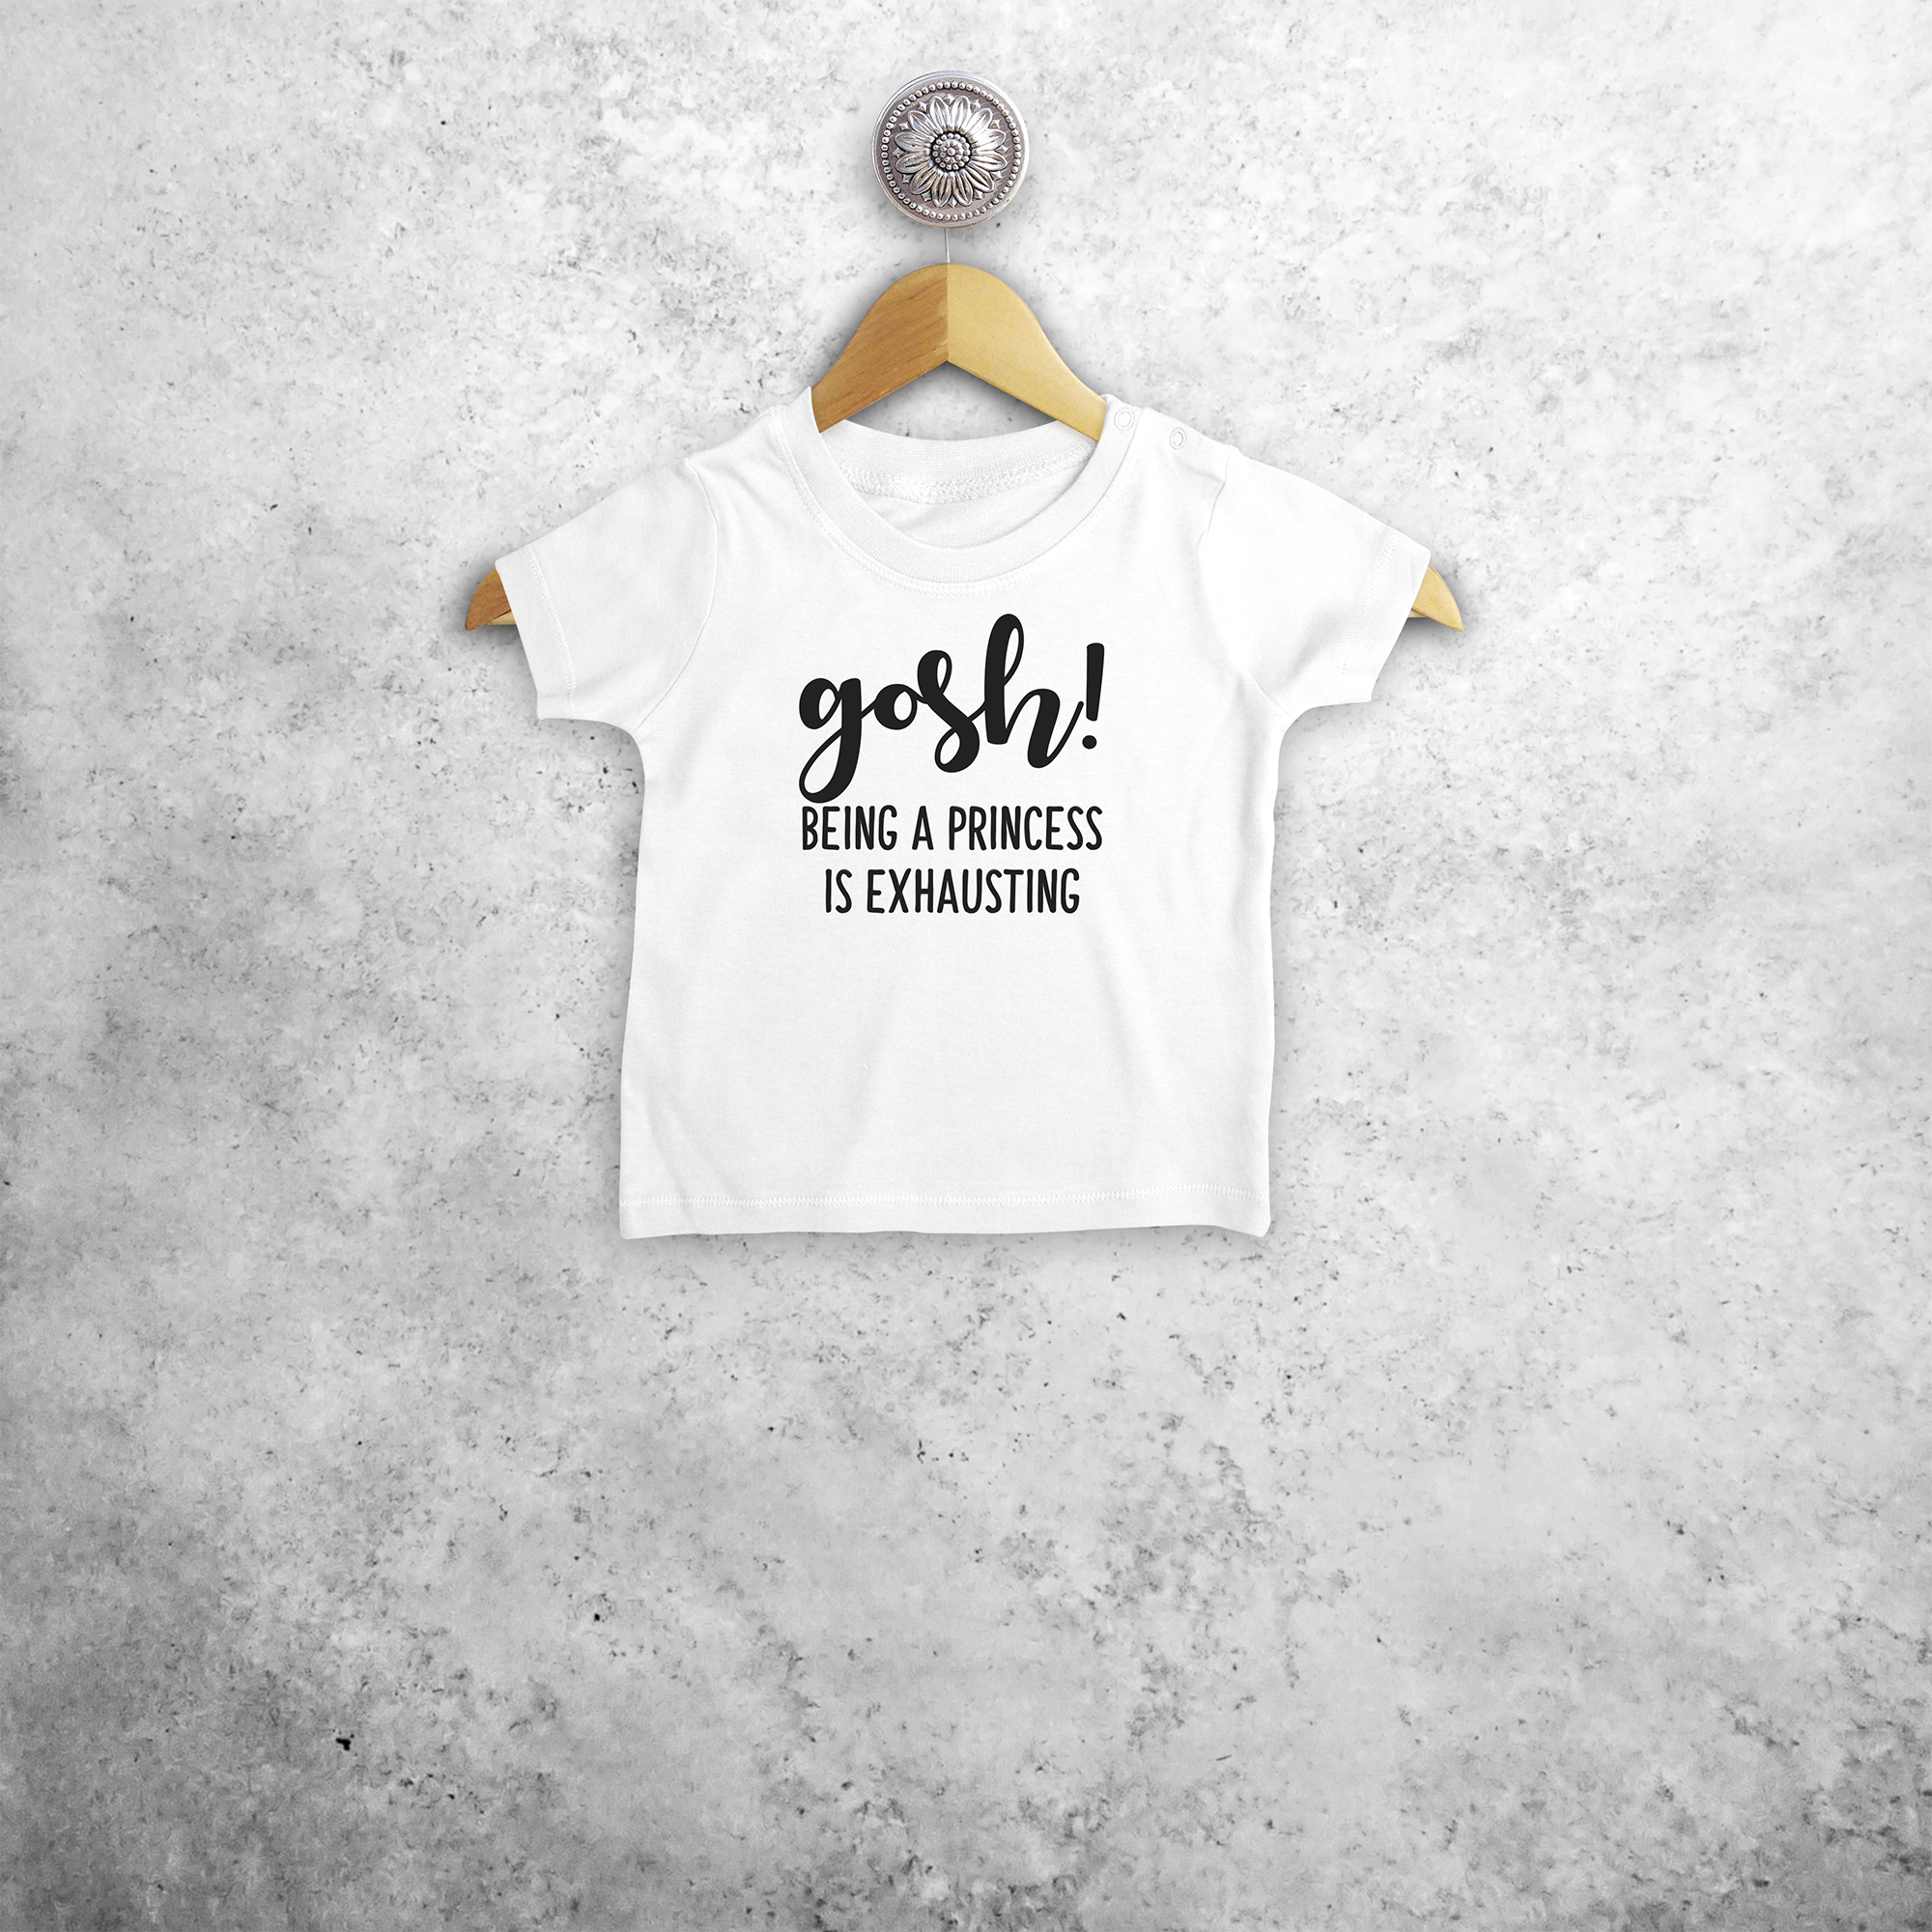 'Gosh! Being a princess is exhausting' baby shortsleeve shirt